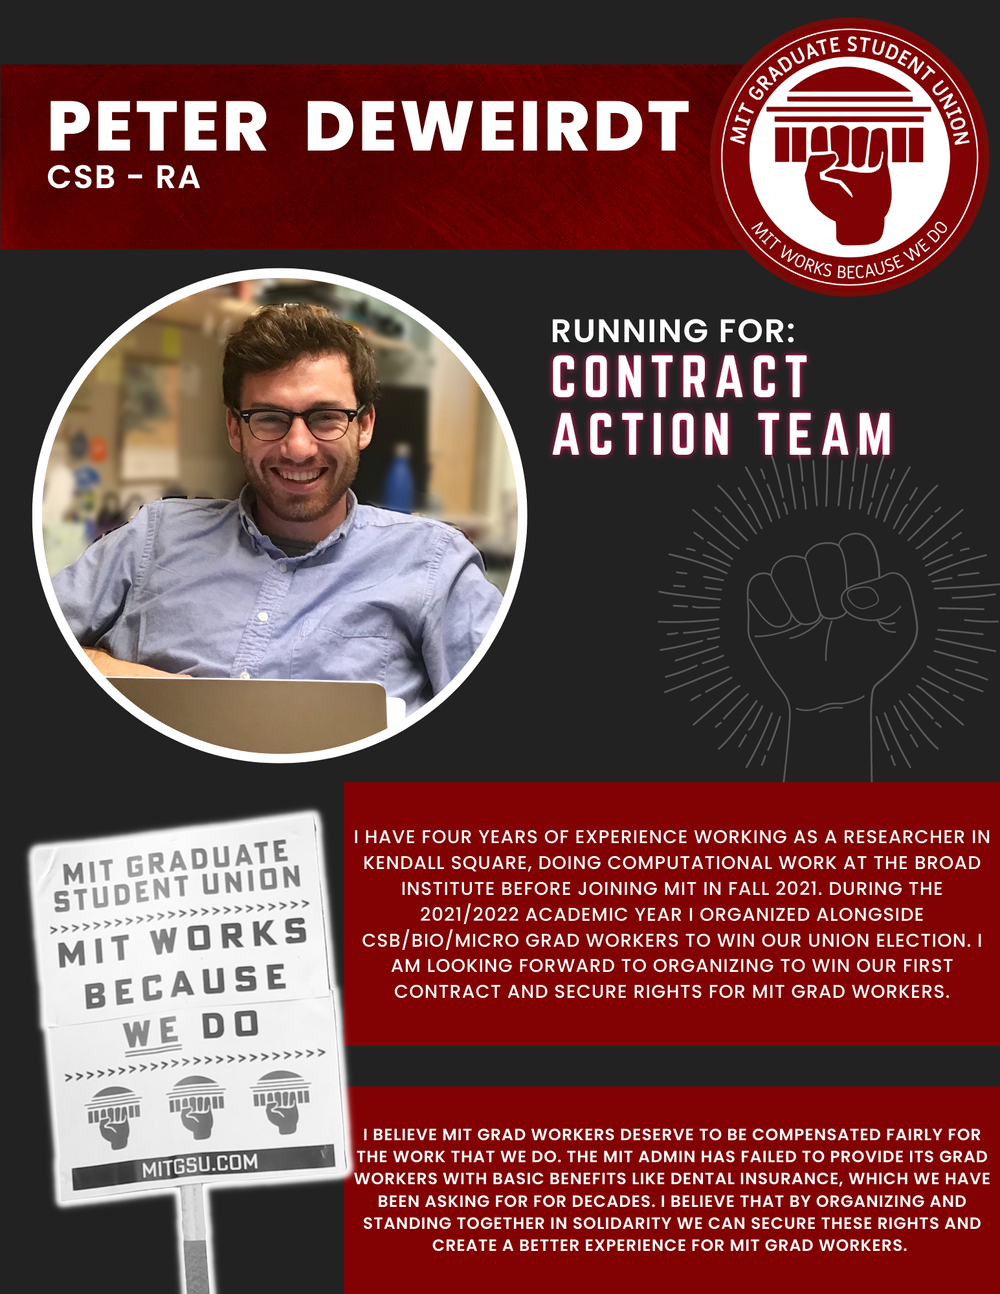  PETER DEWEIRDT  CSB - RA   RUNNING FOR: Contract Action Team  I HAVE FOUR YEARS OF EXPERIENCE WORKING AS A RESEARCHER IN KENDALL SQUARE, DOING COMPUTATIONAL WORK AT THE BROAD INSTITUTE BEFORE JOINING MIT IN FALL 2021. DURING THE 2021/2022 ACADEMIC Y